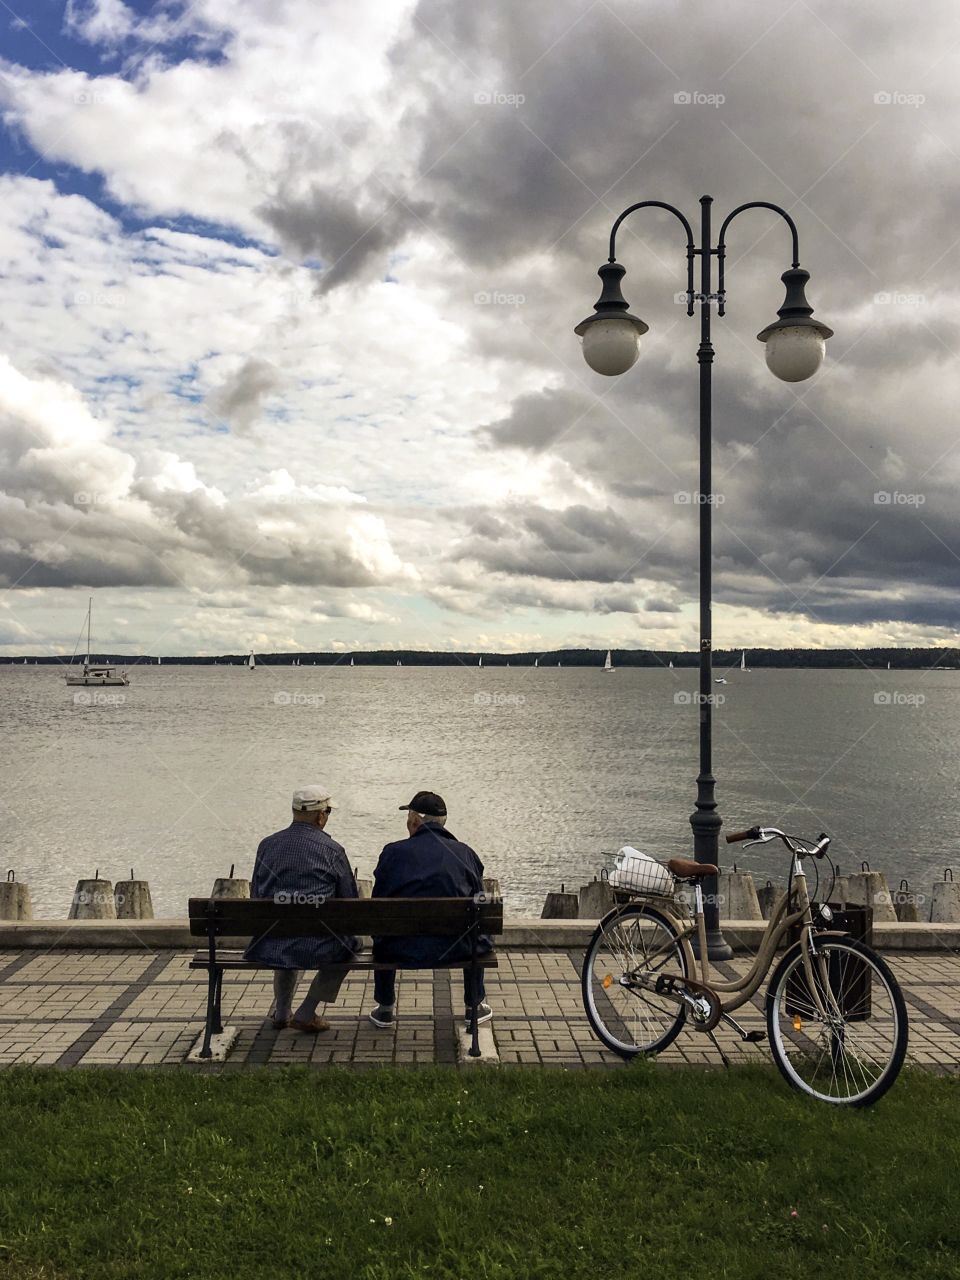 A view of two old men from behind sitting on a bench with parked bicycle next to the bench in front of a lake in a sunny day.